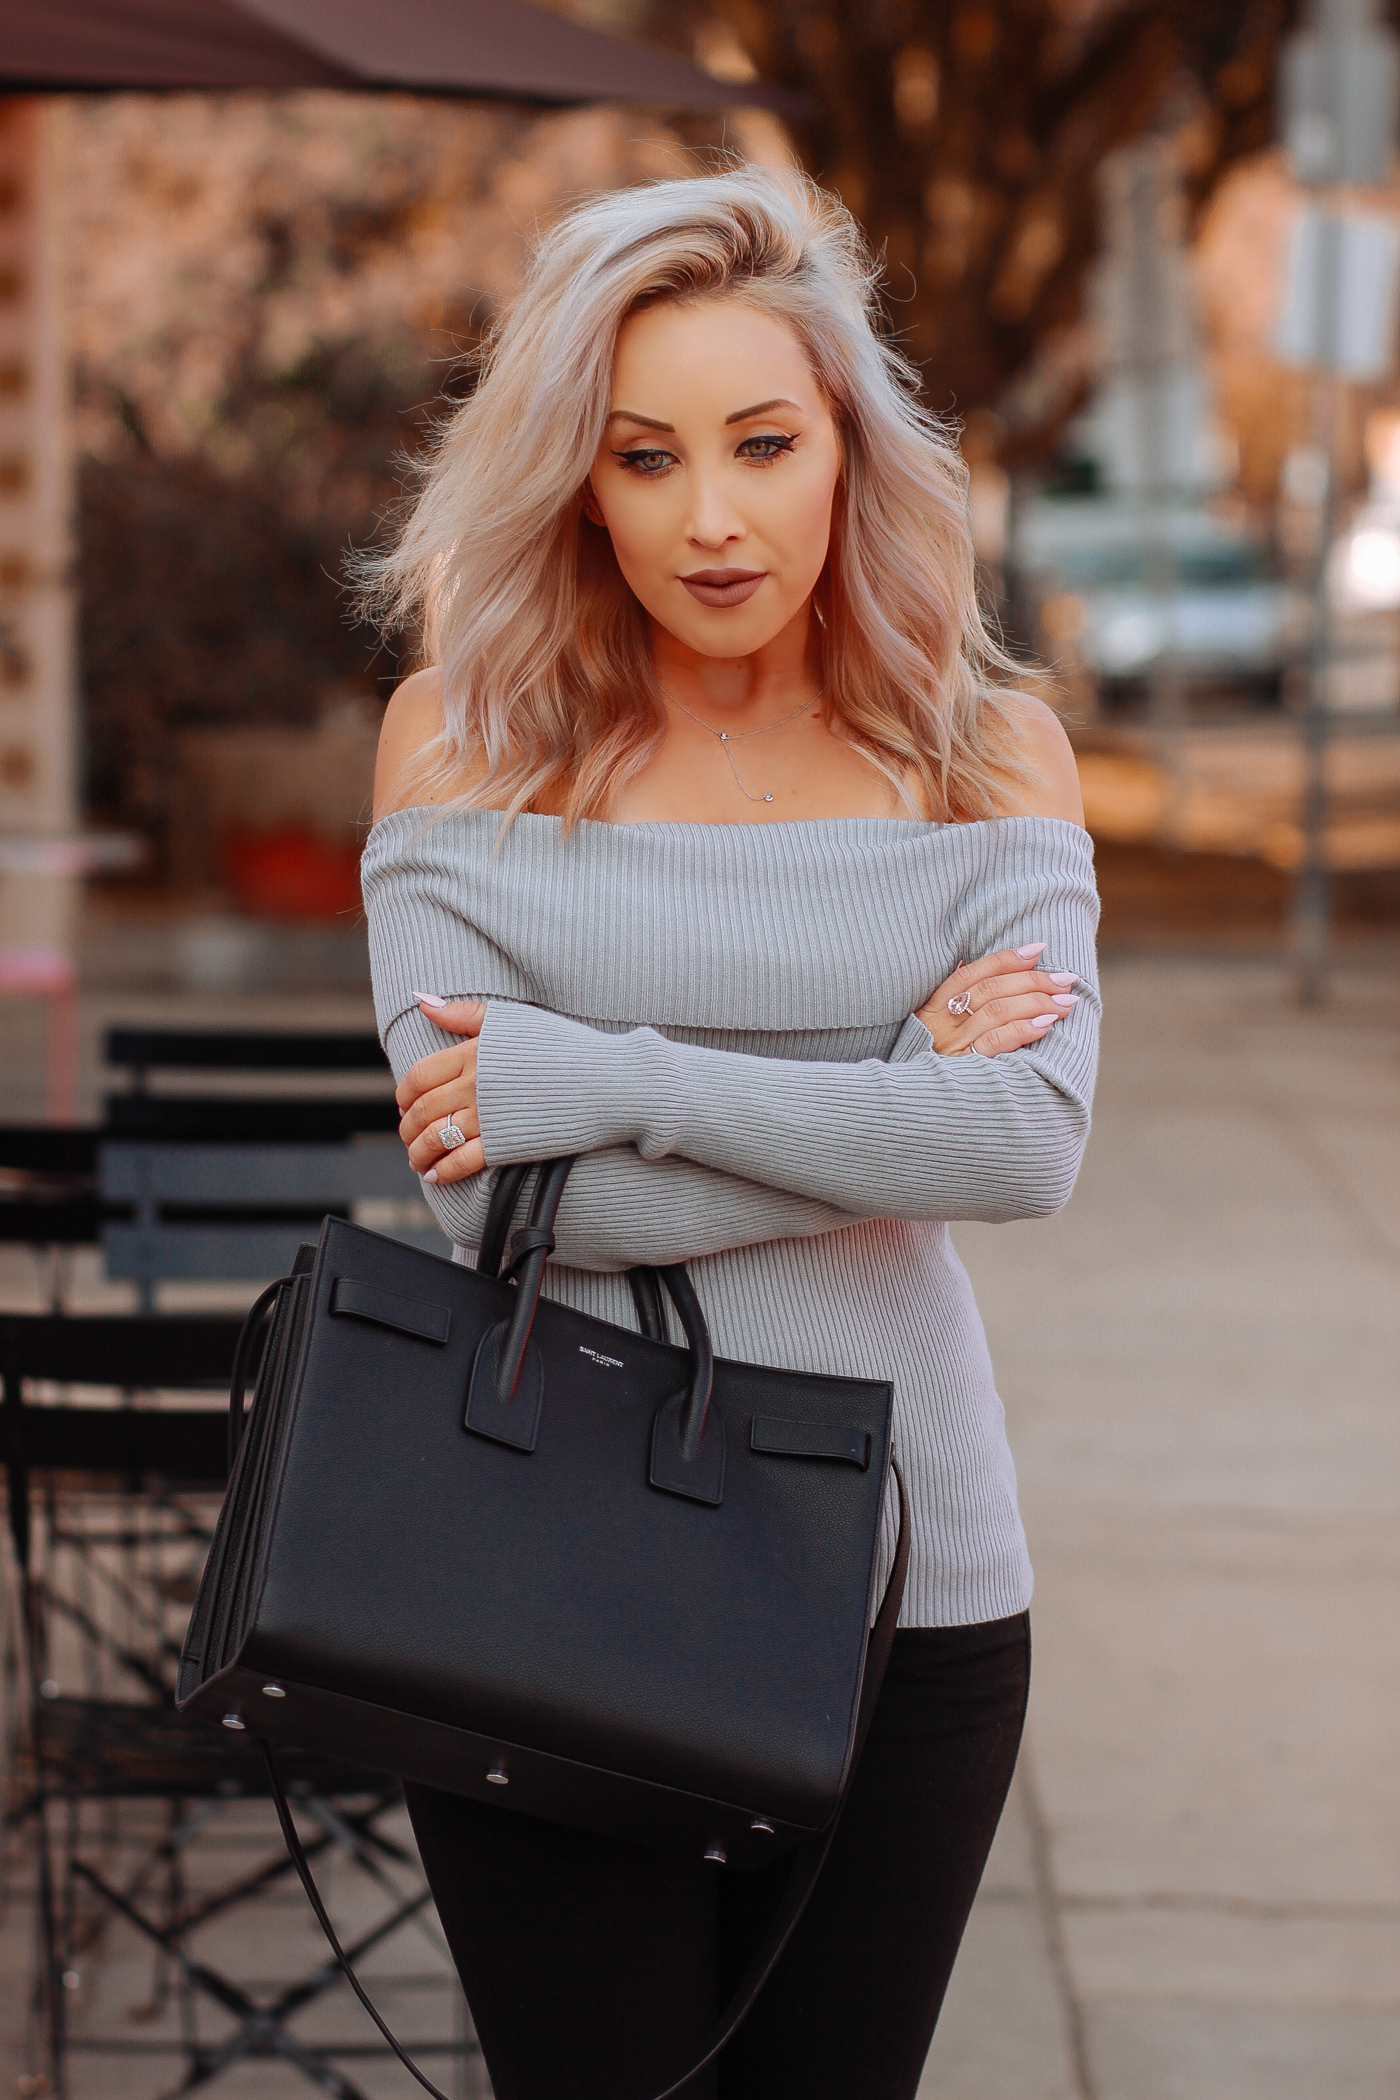 Blondie in the City | Off The Shoulder Sweater | Saint Laurent Bag